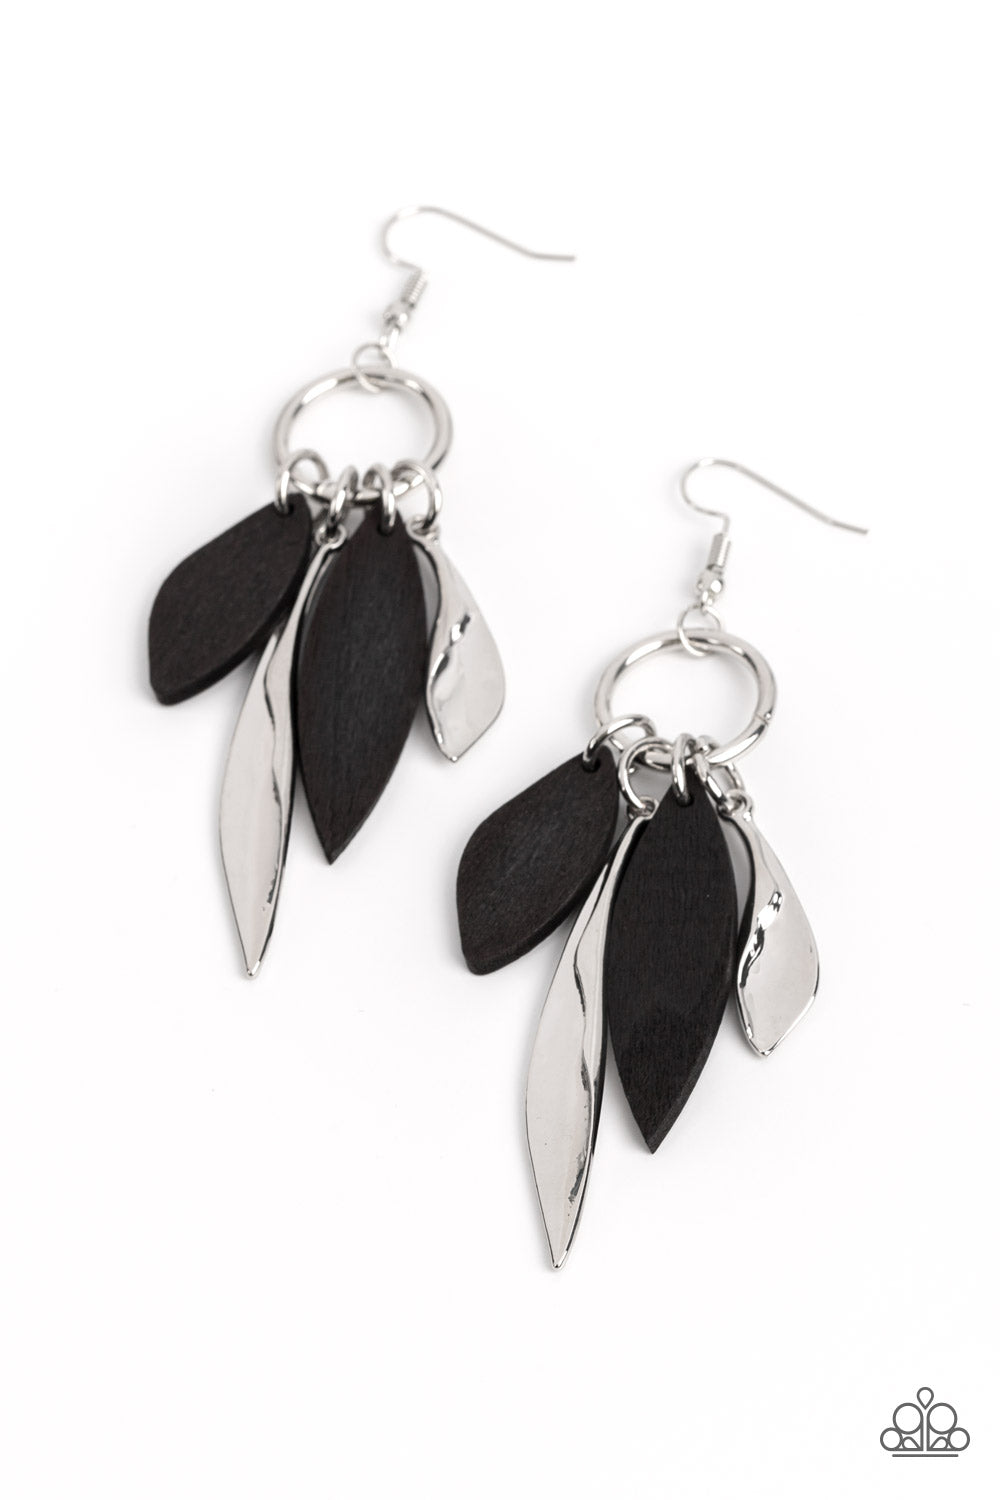 Primal Palette Black Earring - Paparazzi Accessories  A mismatched collection of asymmetrical black wooden frames and warped silver petals glide along a silver ring, resulting in an earthy tassel. Earring attaches to a standard fishhook fitting.  Sold as one pair of earrings.  P5SE-BKXX-317XX